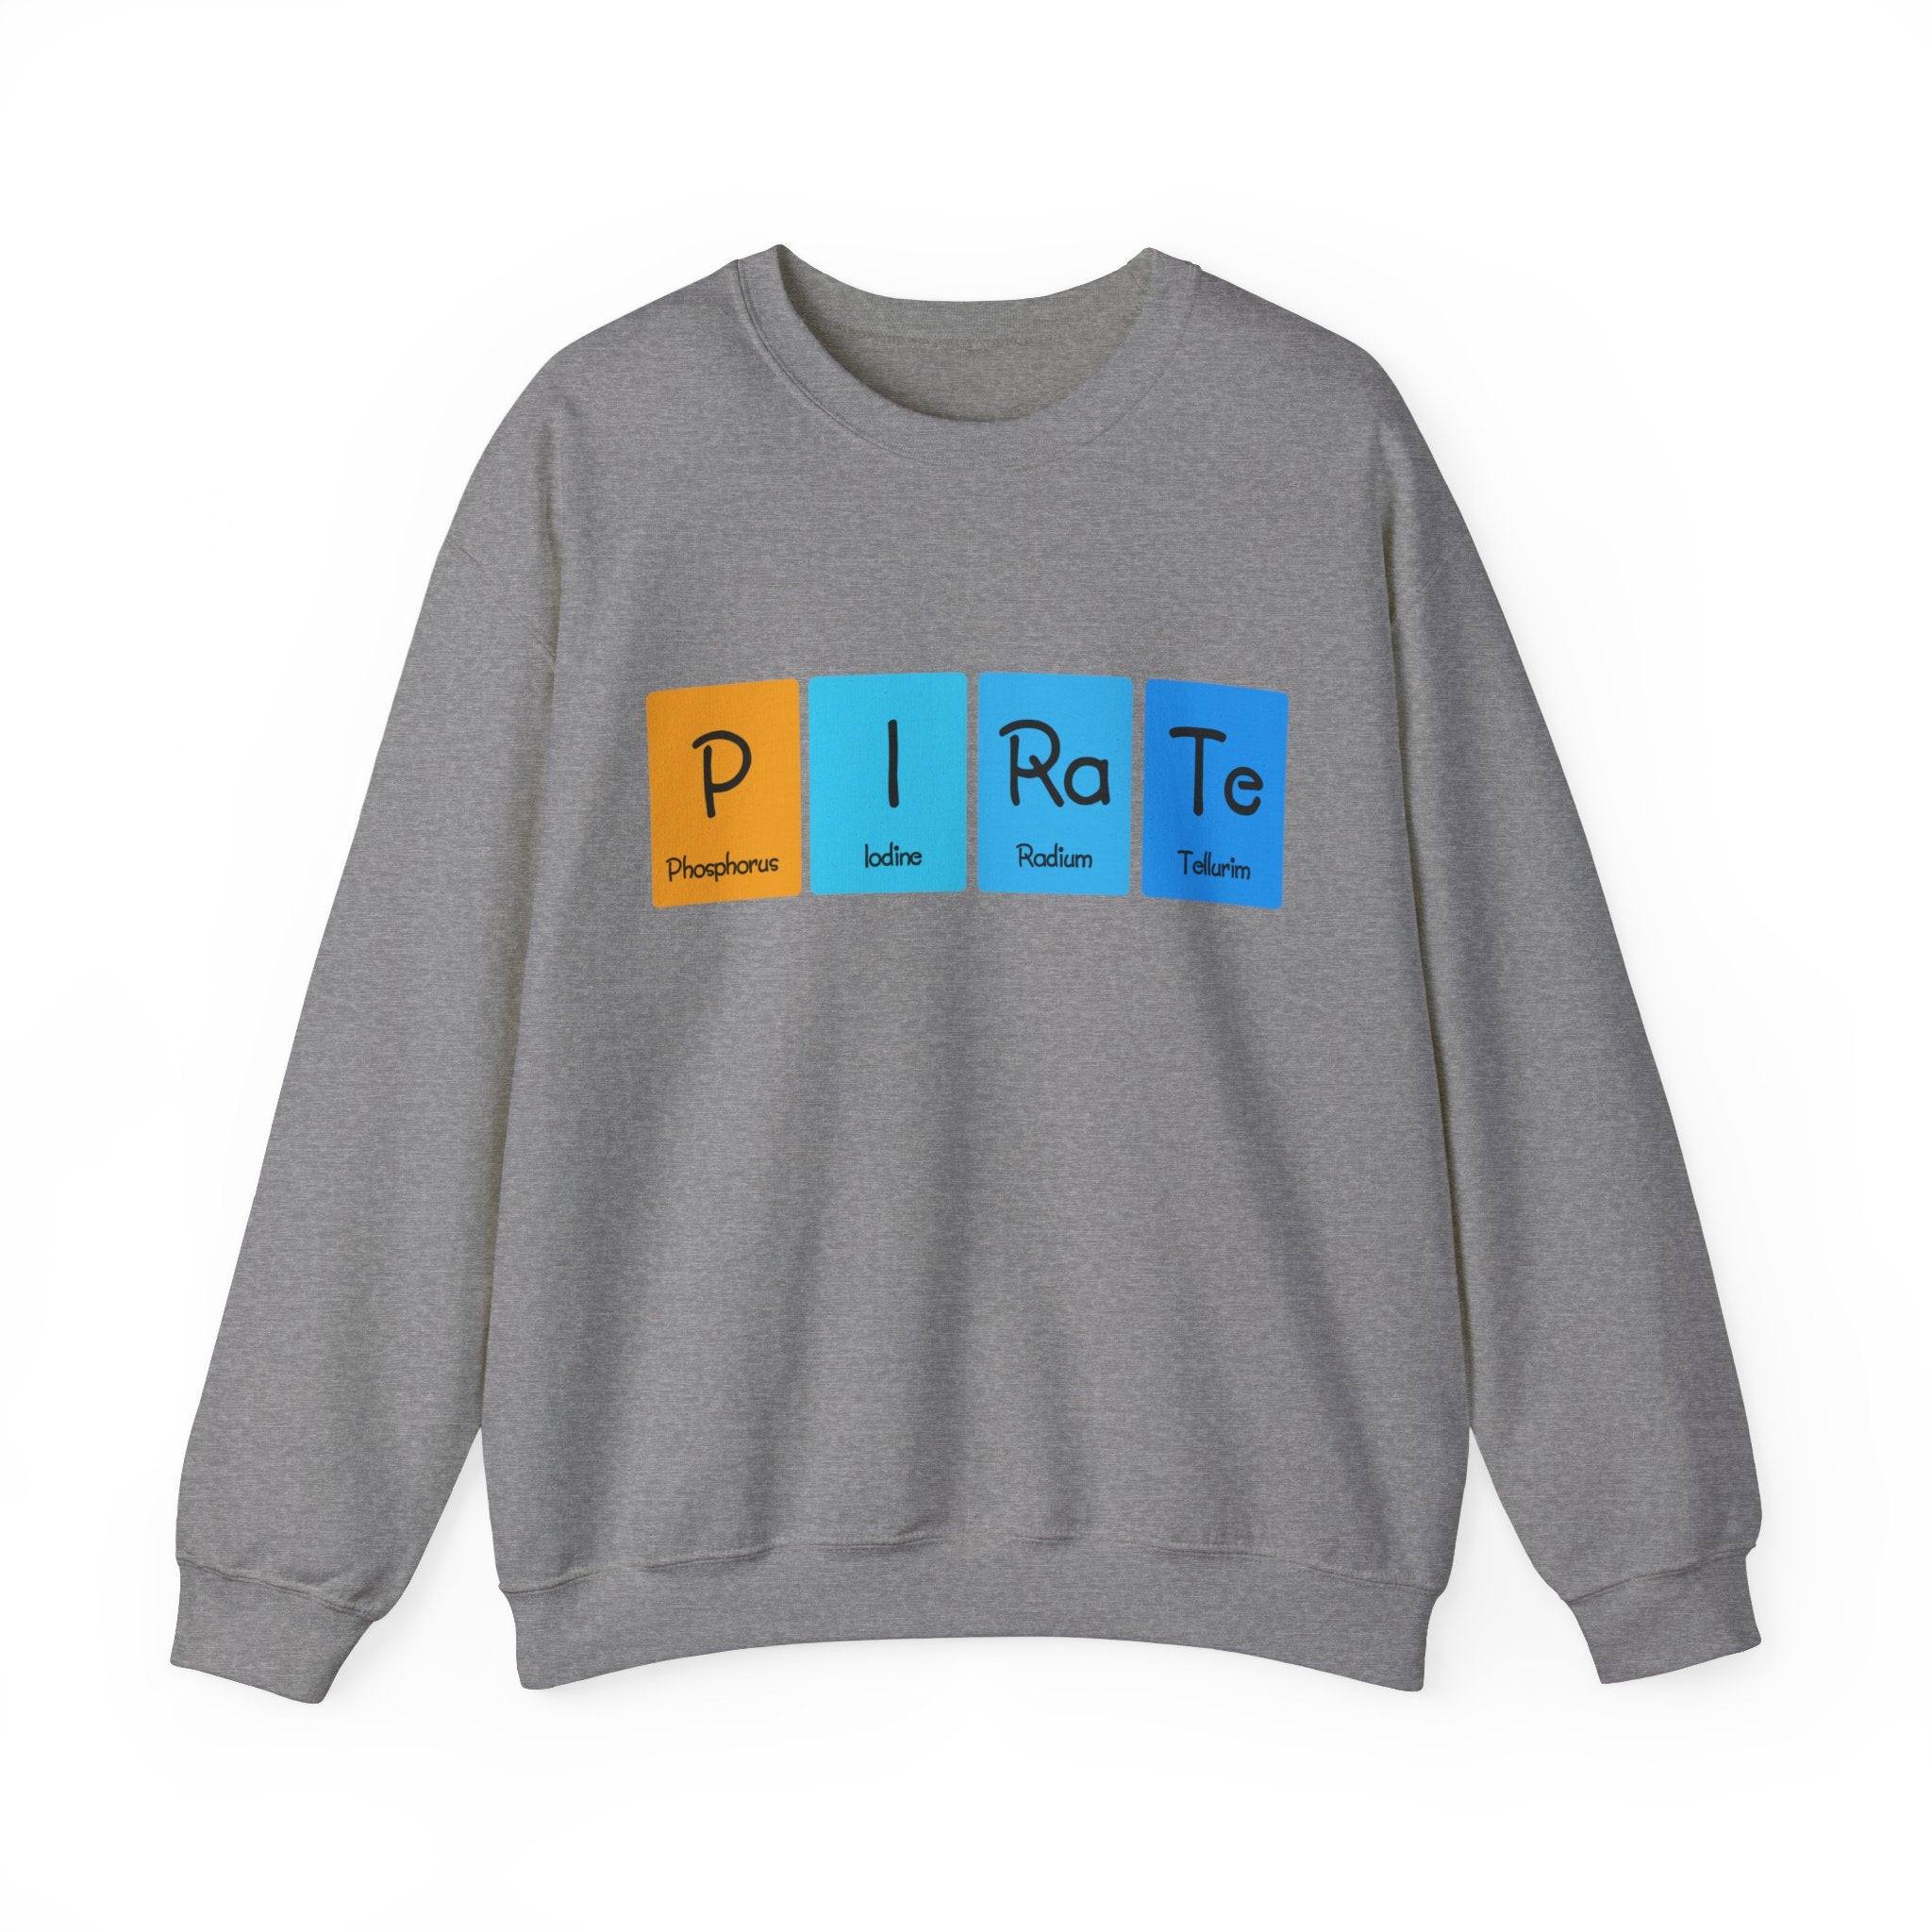 P-I-Ra-Te - Sweatshirt featuring the word "P-I-Ra-Te" crafted with colorful blocks representing elements from the periodic table (Phosphorus, Iodine, Radium, Tellurium), perfect for the colder months.